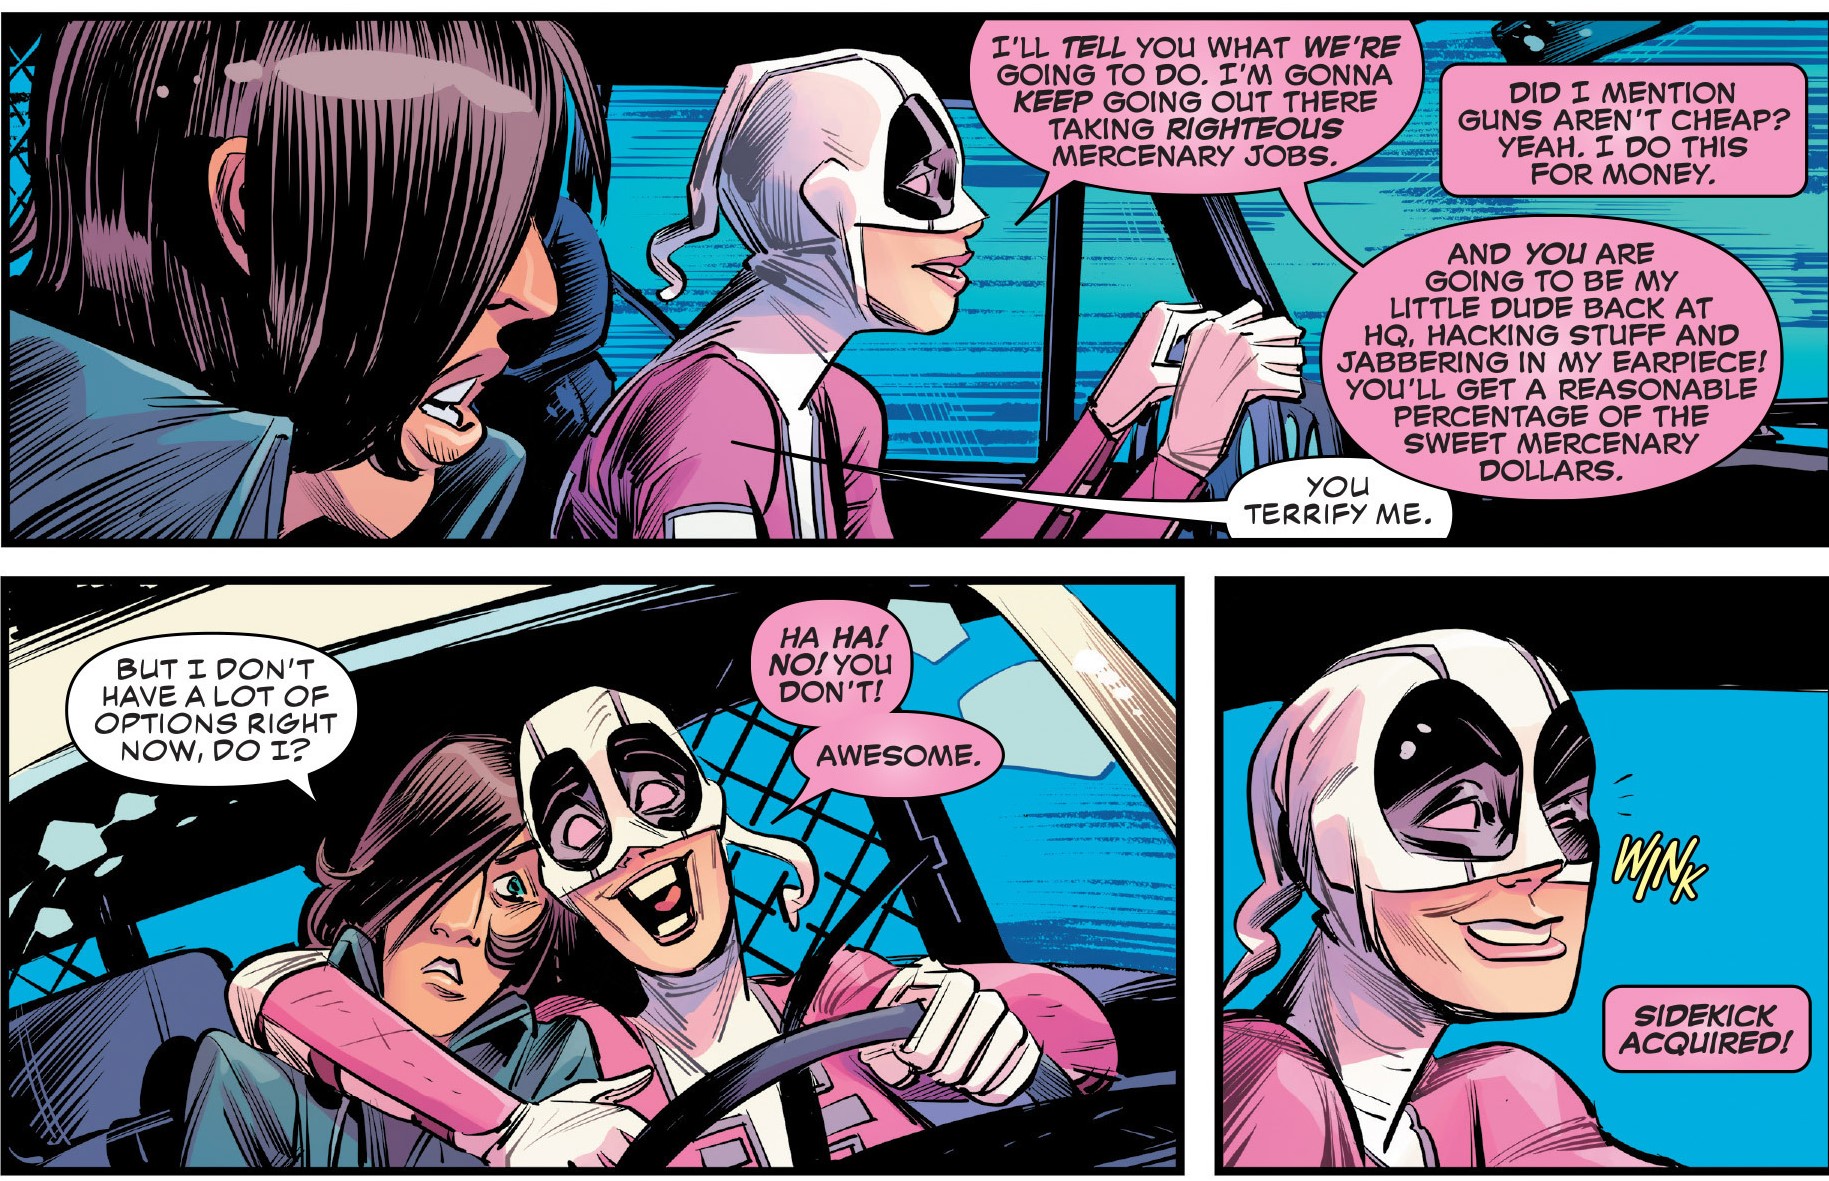 Gwenpool drives a police cruiser and acquires Cecil as a sidekick. Hastings, Christopher. "Unbelievable Gwenpool Vol. 1." Marvel. 9 Nov. 2016.